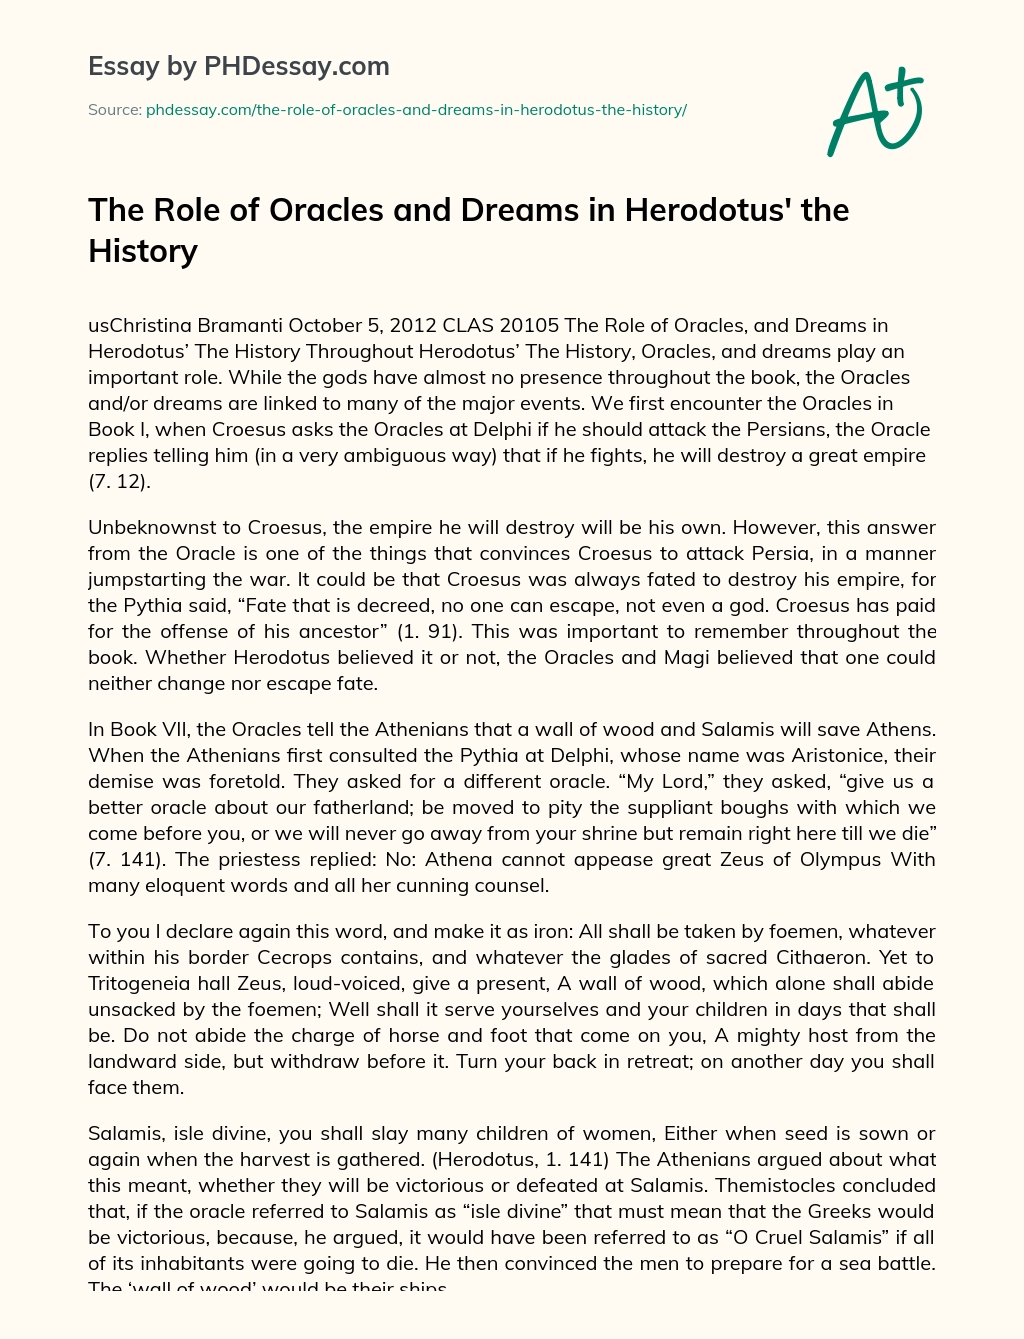 The Role of Oracles and Dreams in Herodotus’ the History essay